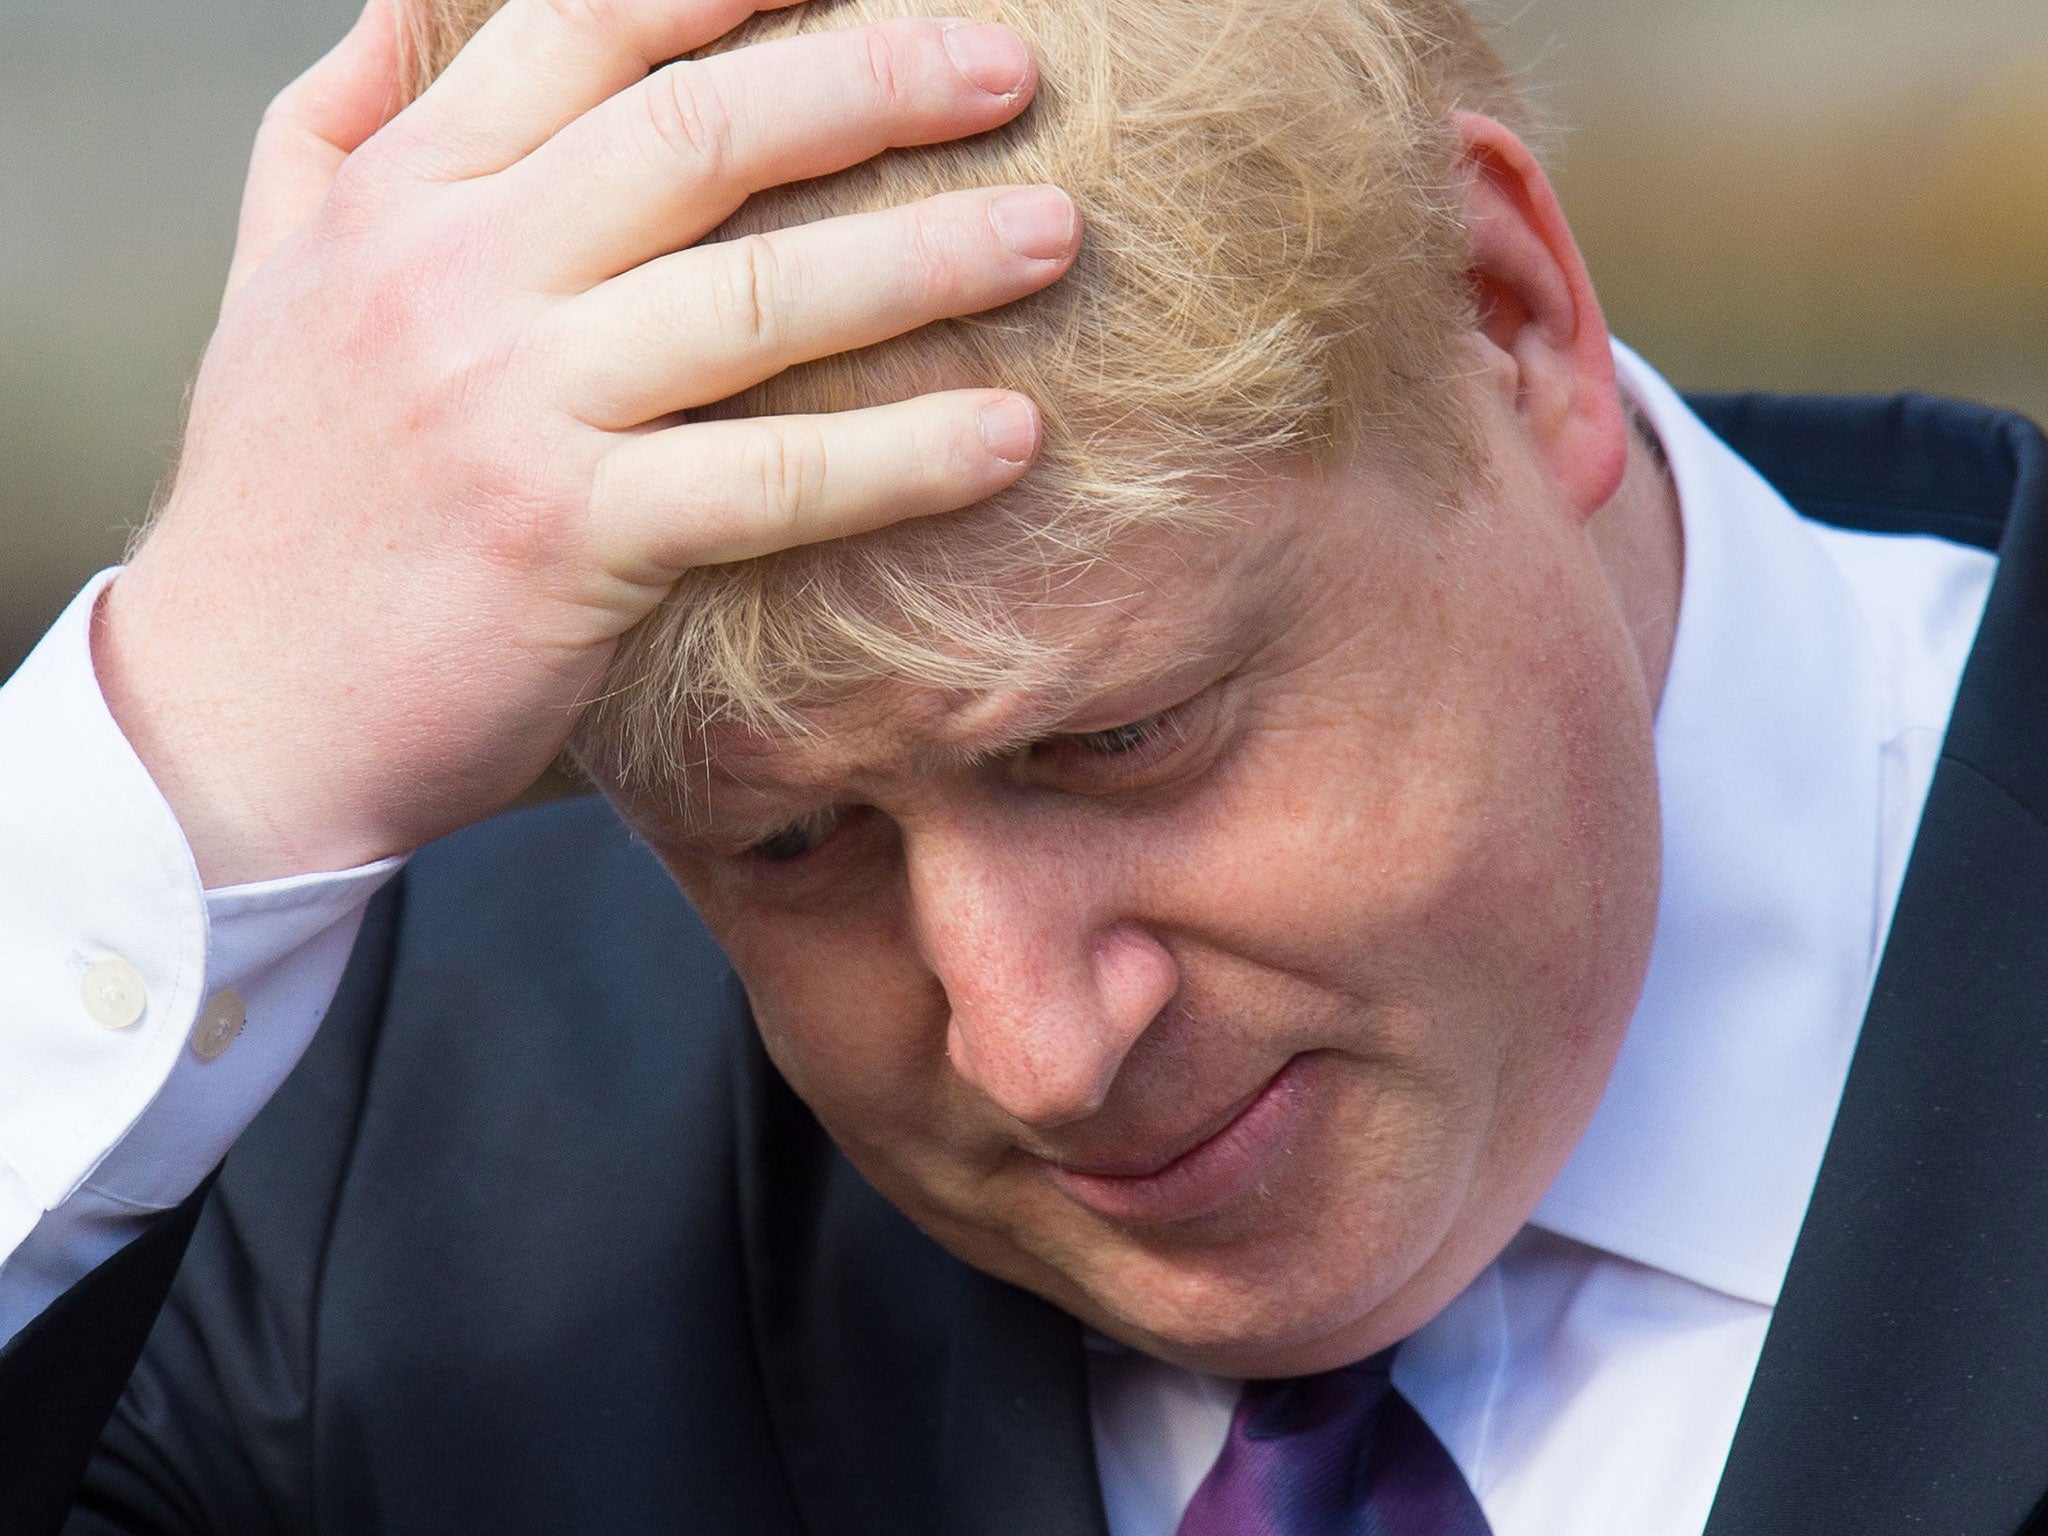 Boris Johnson is campaigning for the UK to leave the EU